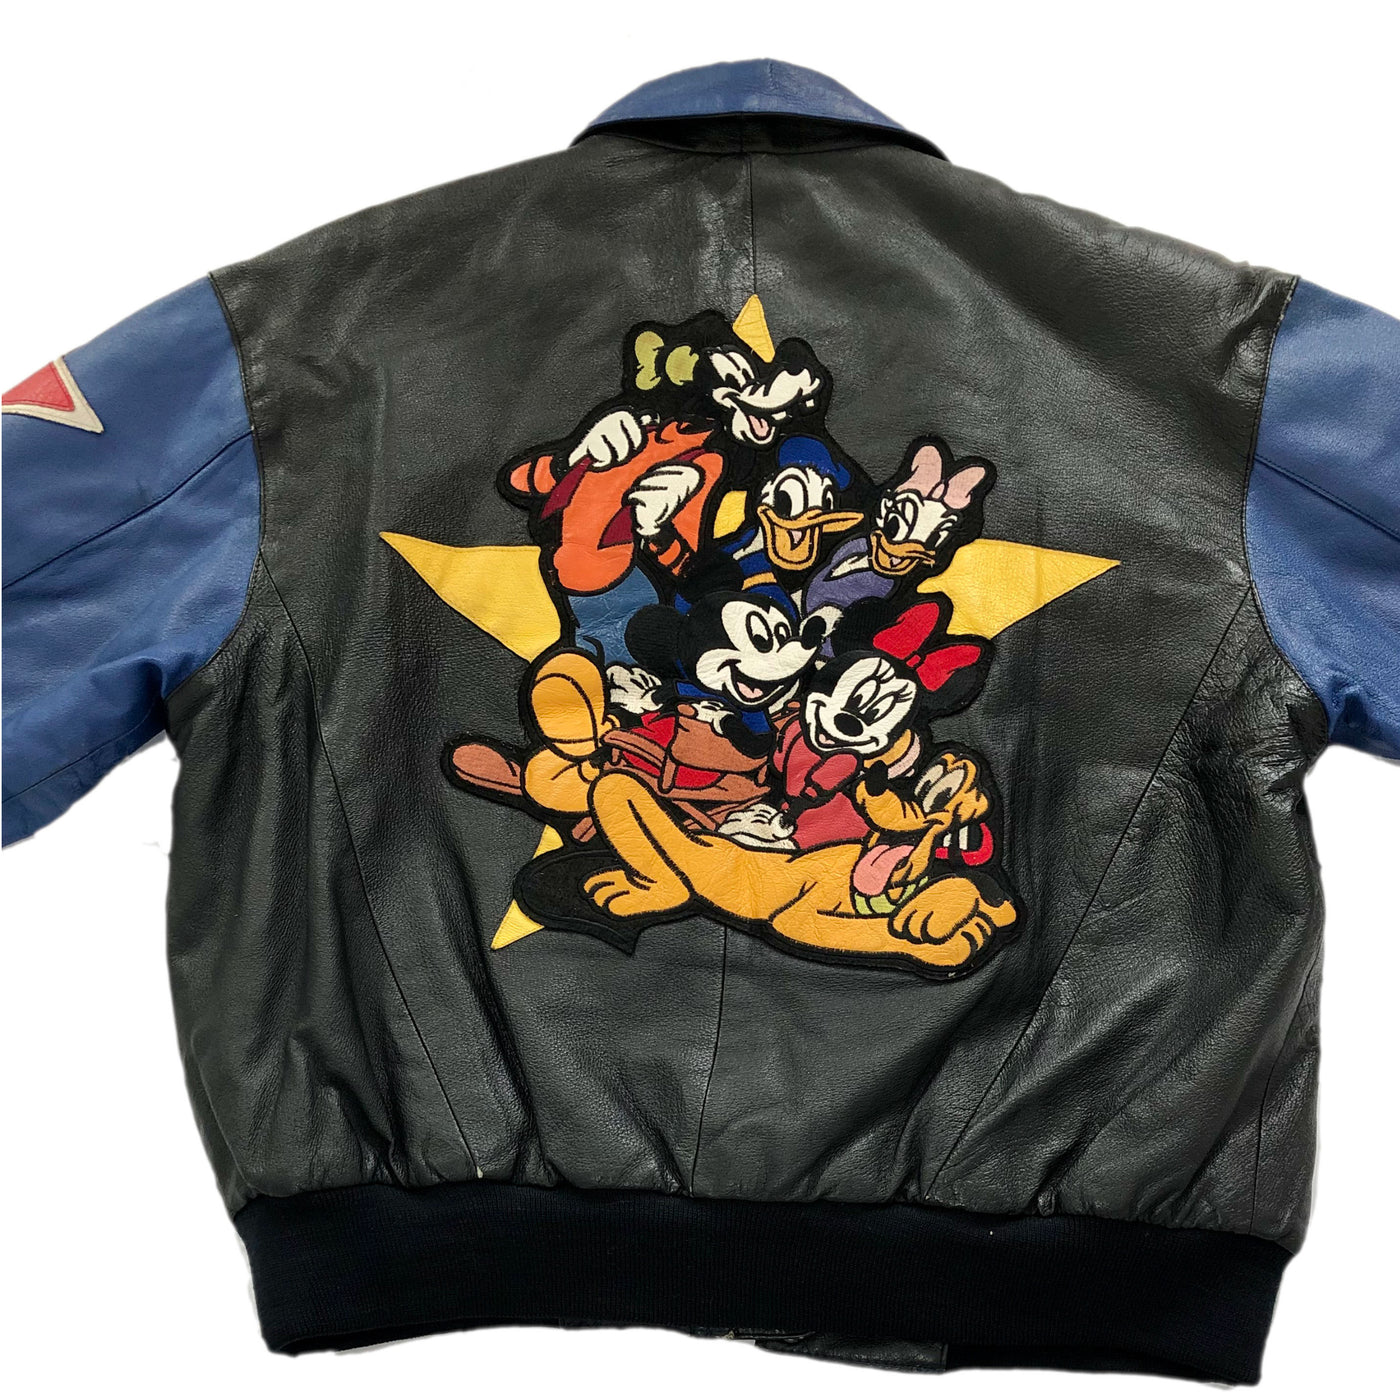 Vintage 90's Disney Mickey and friends leather jacket. Large